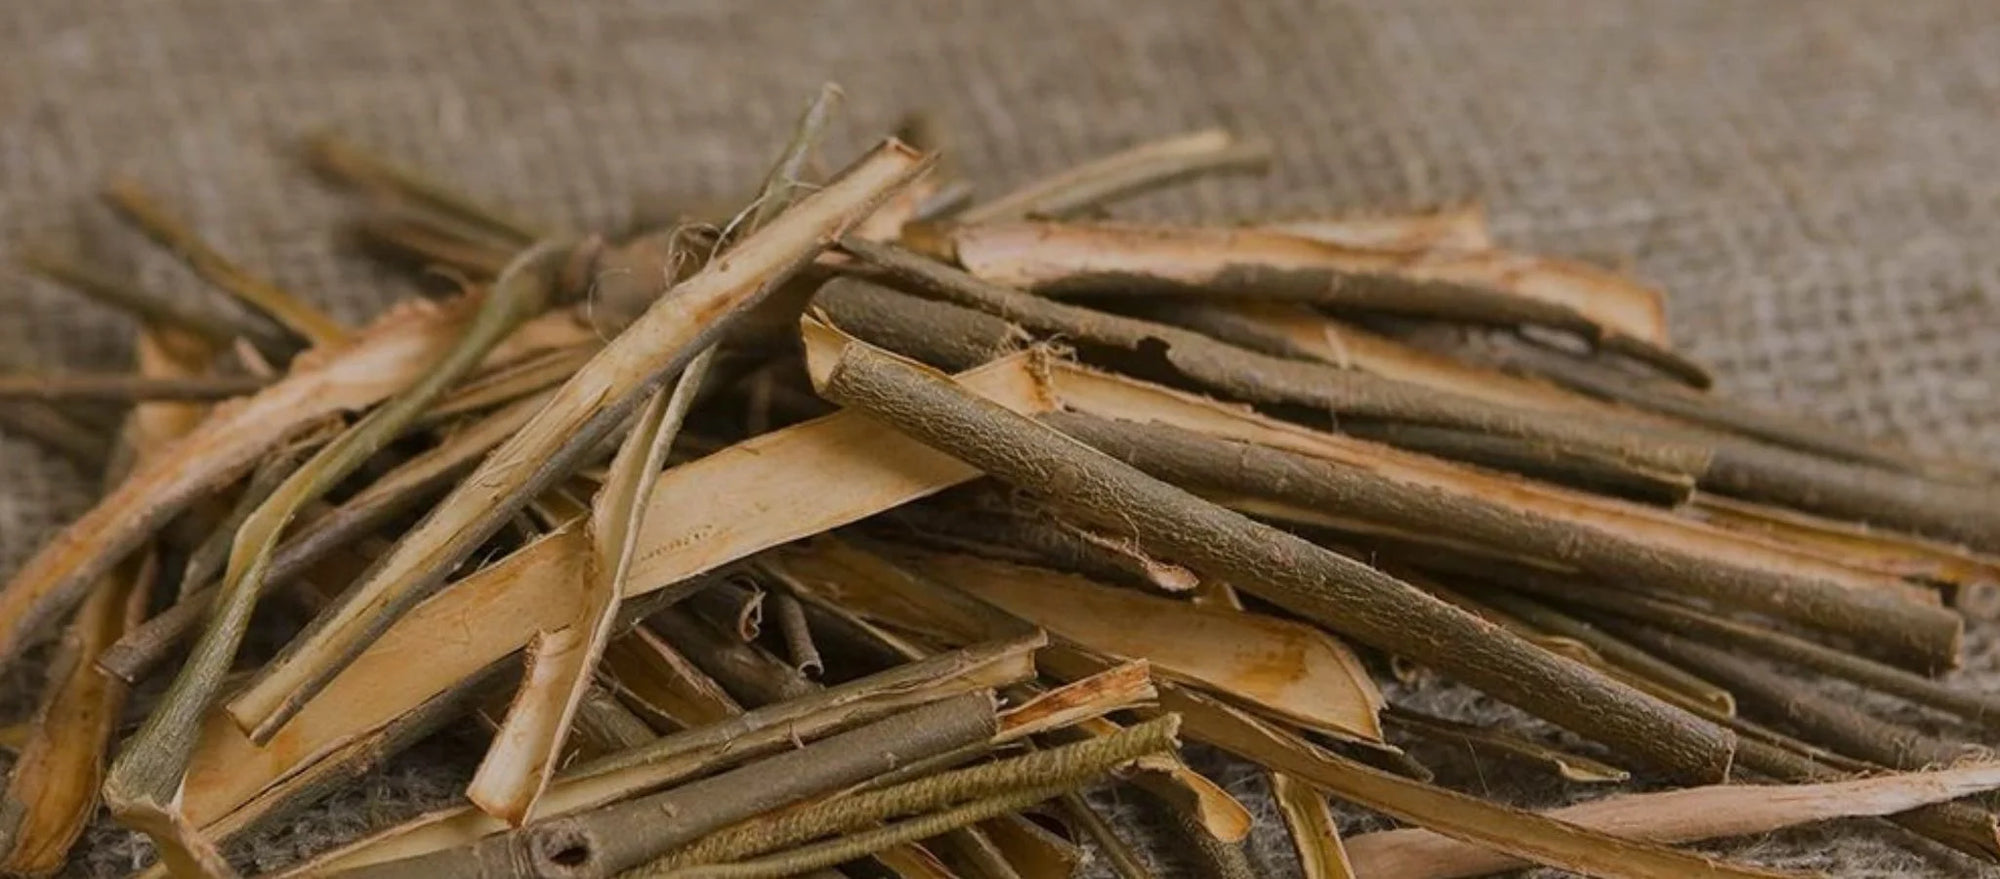 White Willow Bark Benefits - Close-up Image of White Willow Tree and Extracts